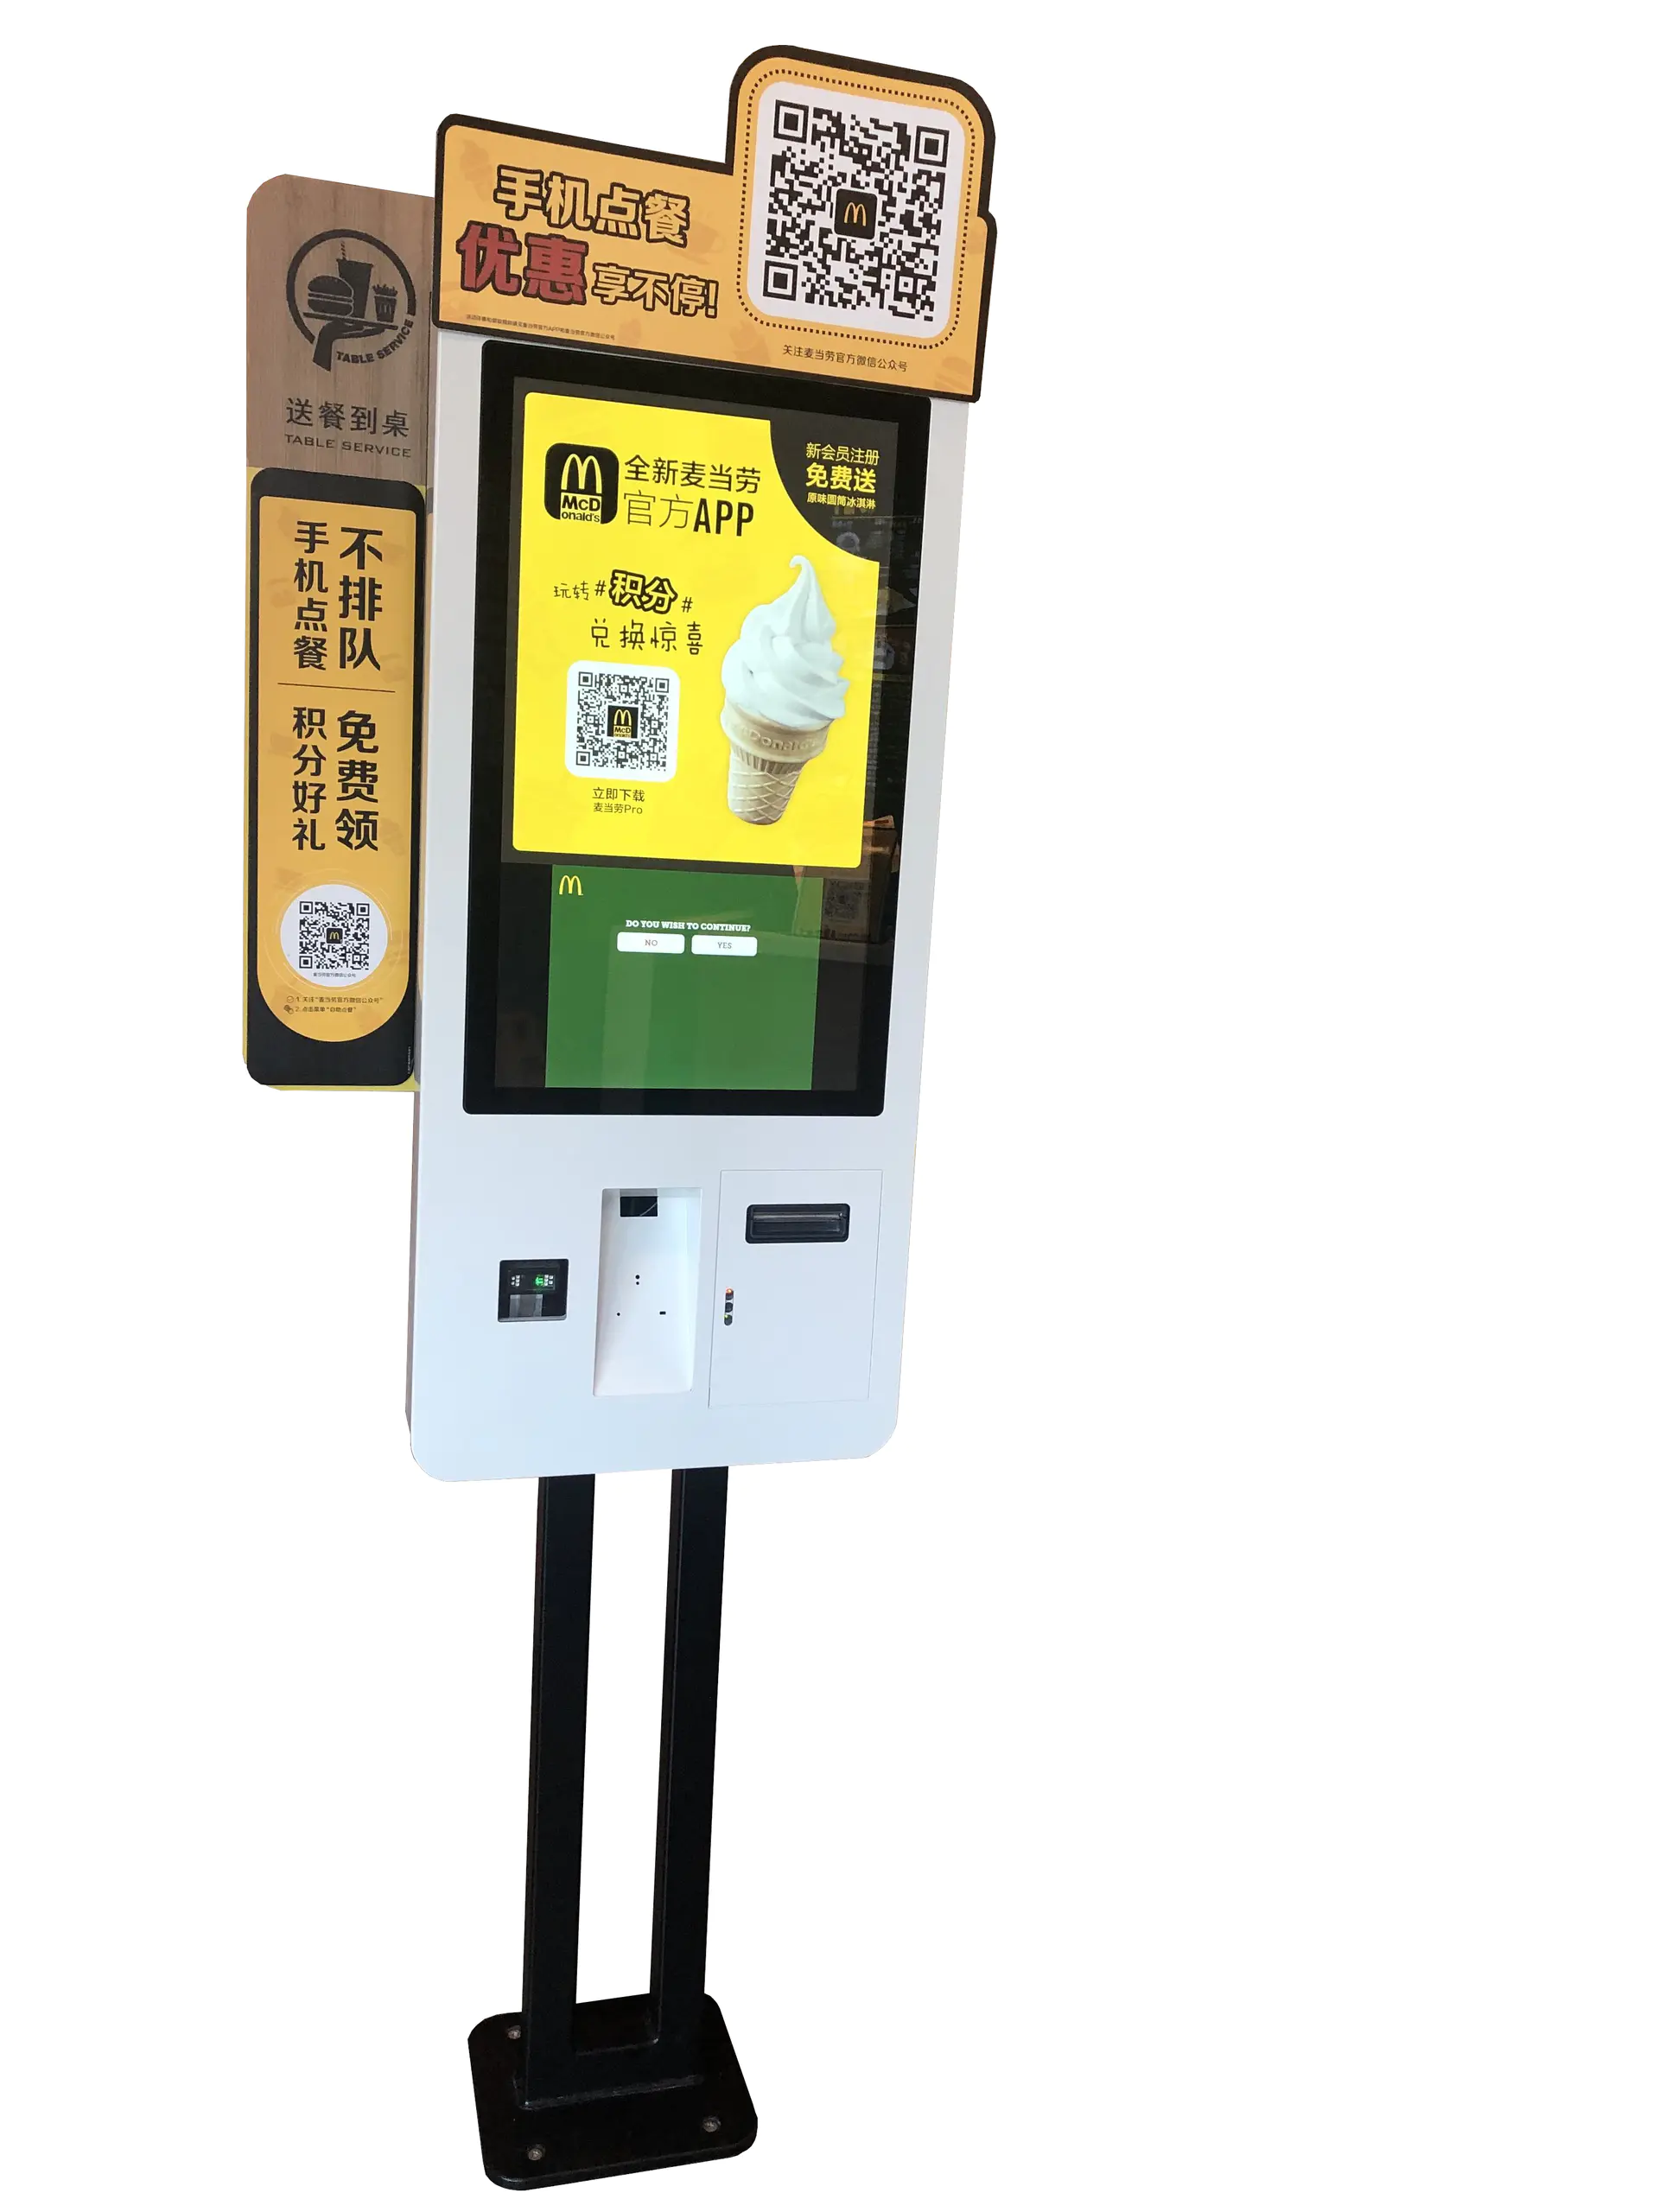 27 inch floor stand LCD digital signage solutions self-payment fast food ordering kiosk